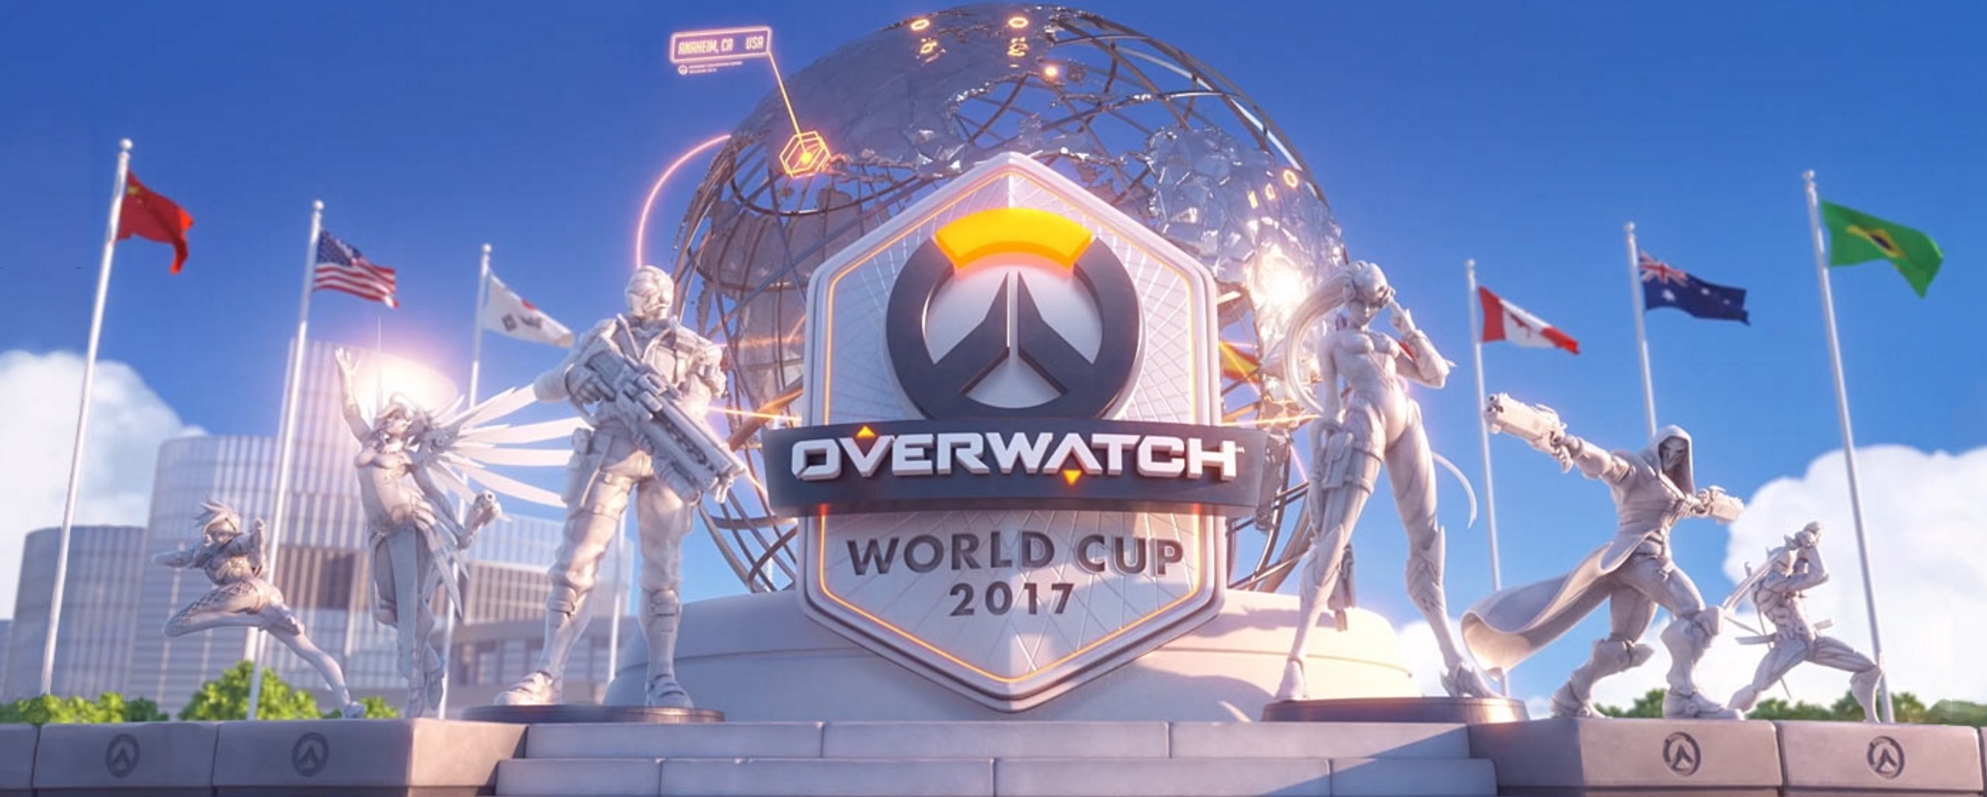 Overwatch World Cup committees, groups, and tournament locations